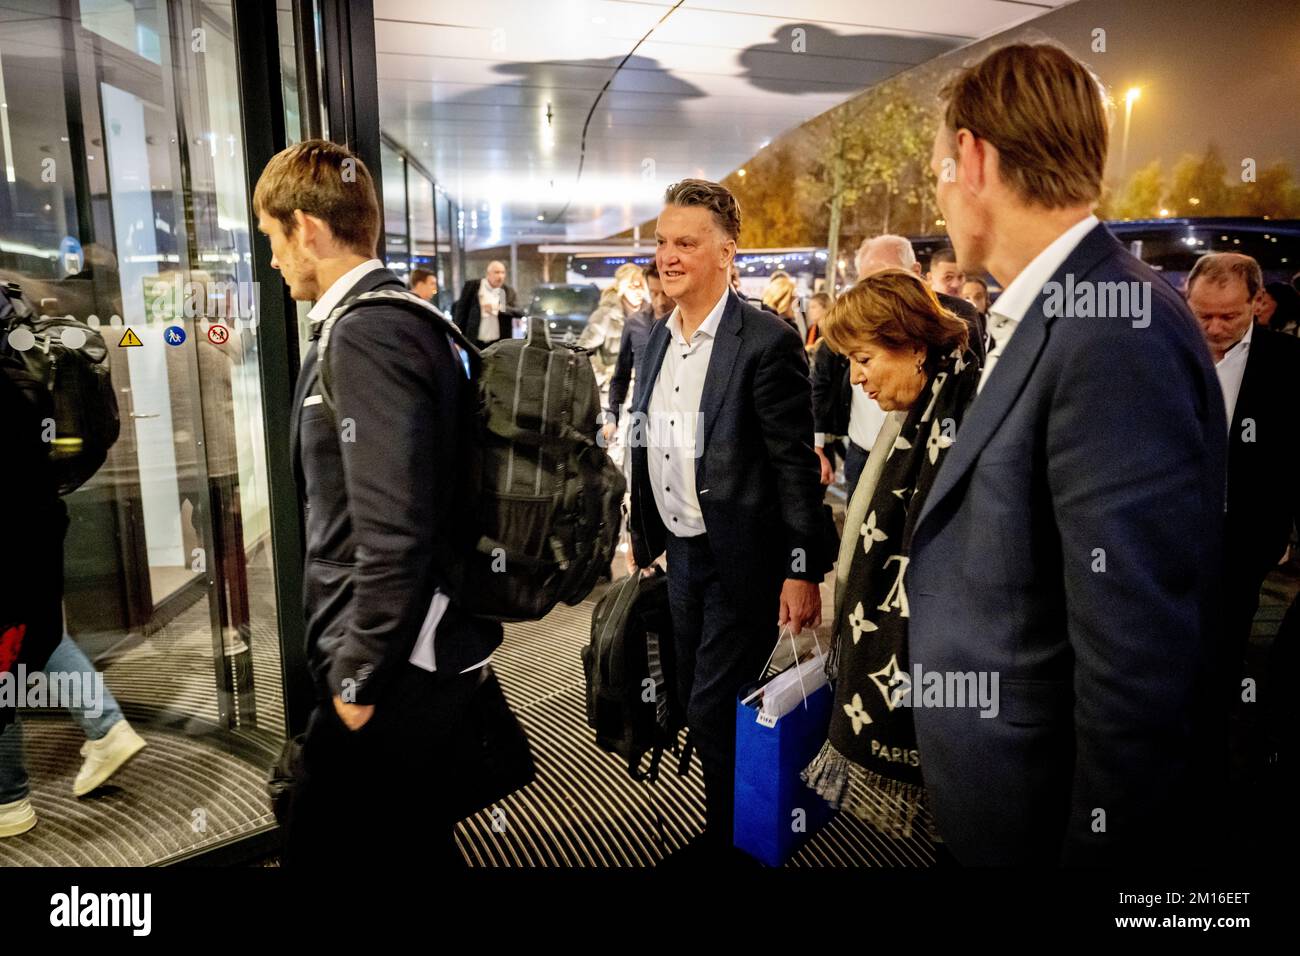 Coach Louis van Gaal of the Dutch national team arrives at Schiphol, The  Netherlands, 10 December 2022. The Dutch team lost in the quarterfinals of  the World Cup to Argentina in Qatar.